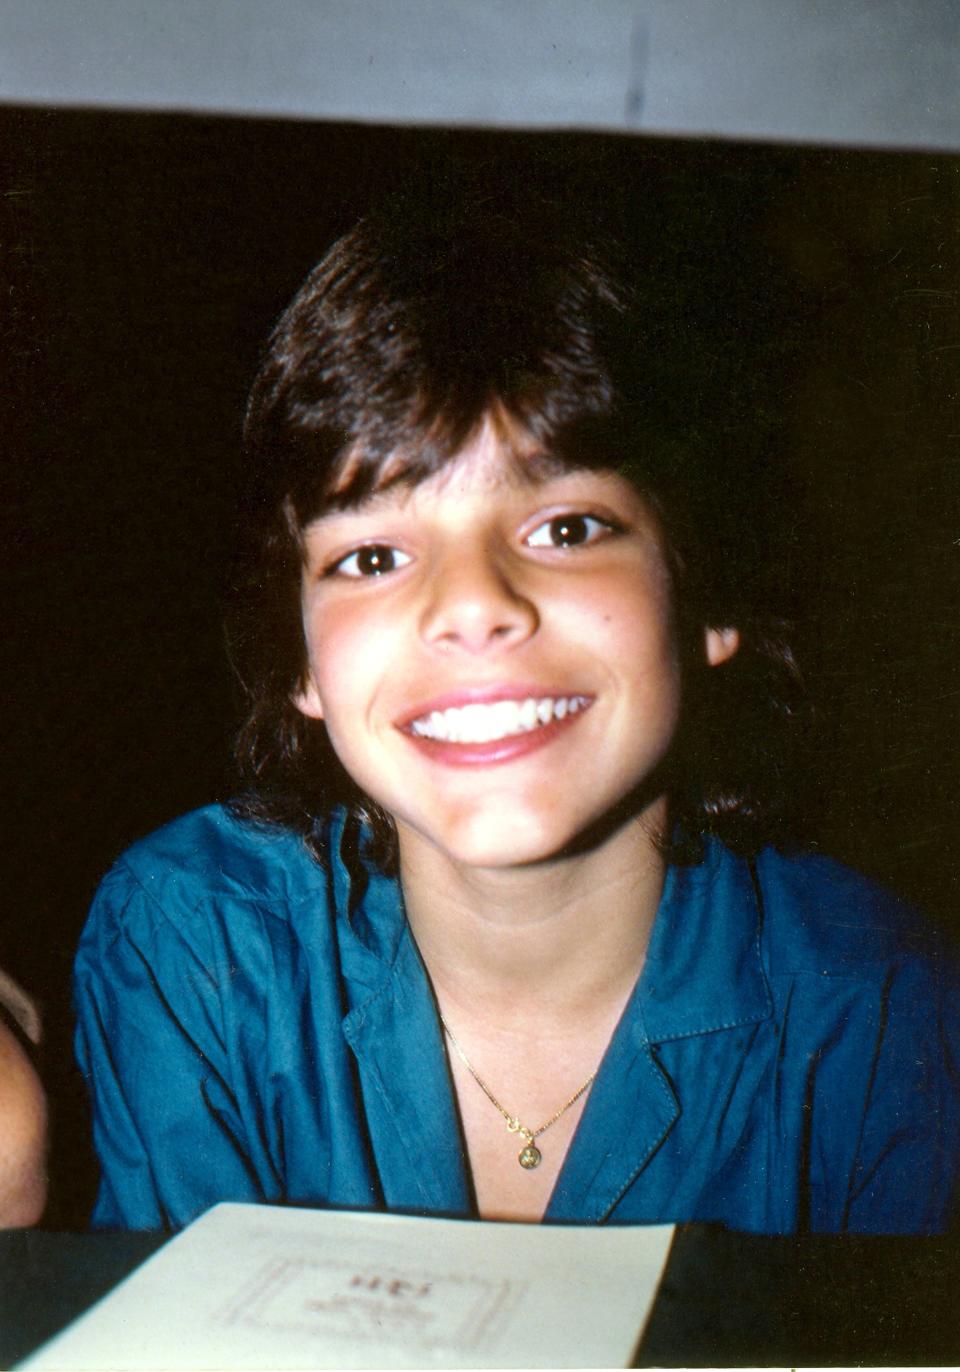 Ricky at 13 when in 1984 he joined Menudo for five years.